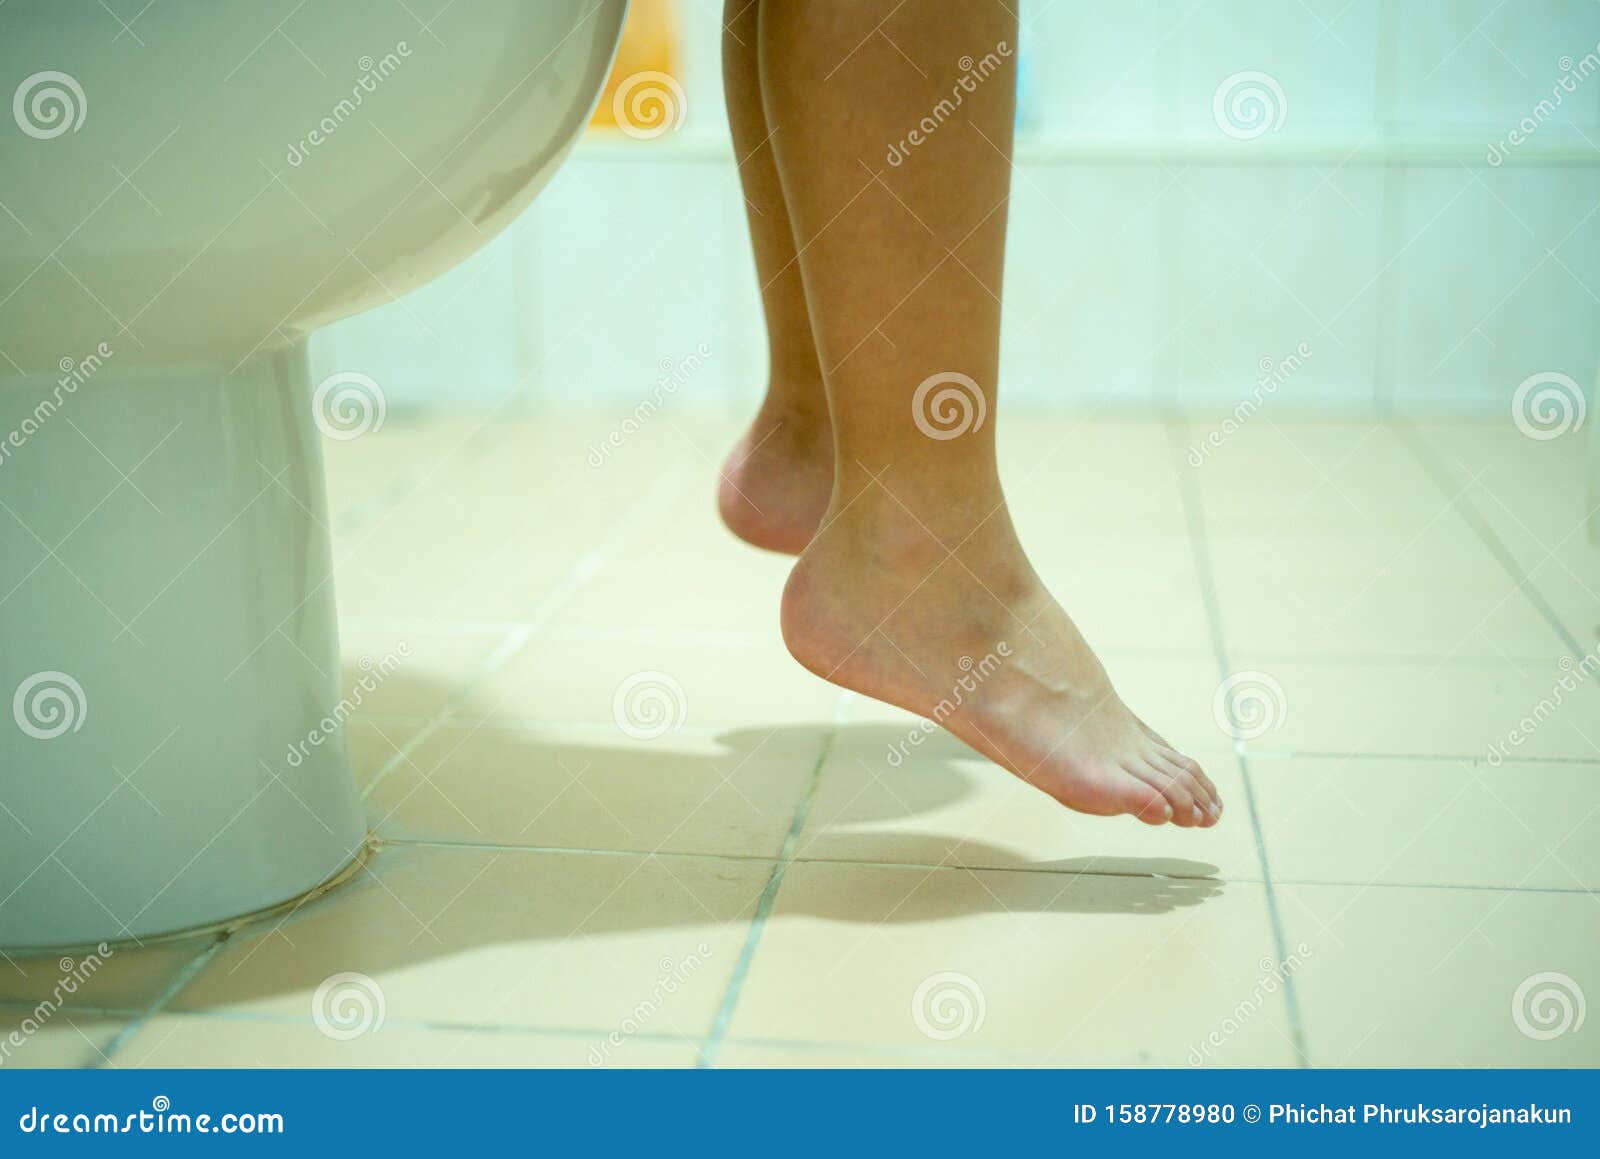 woman peeing close up